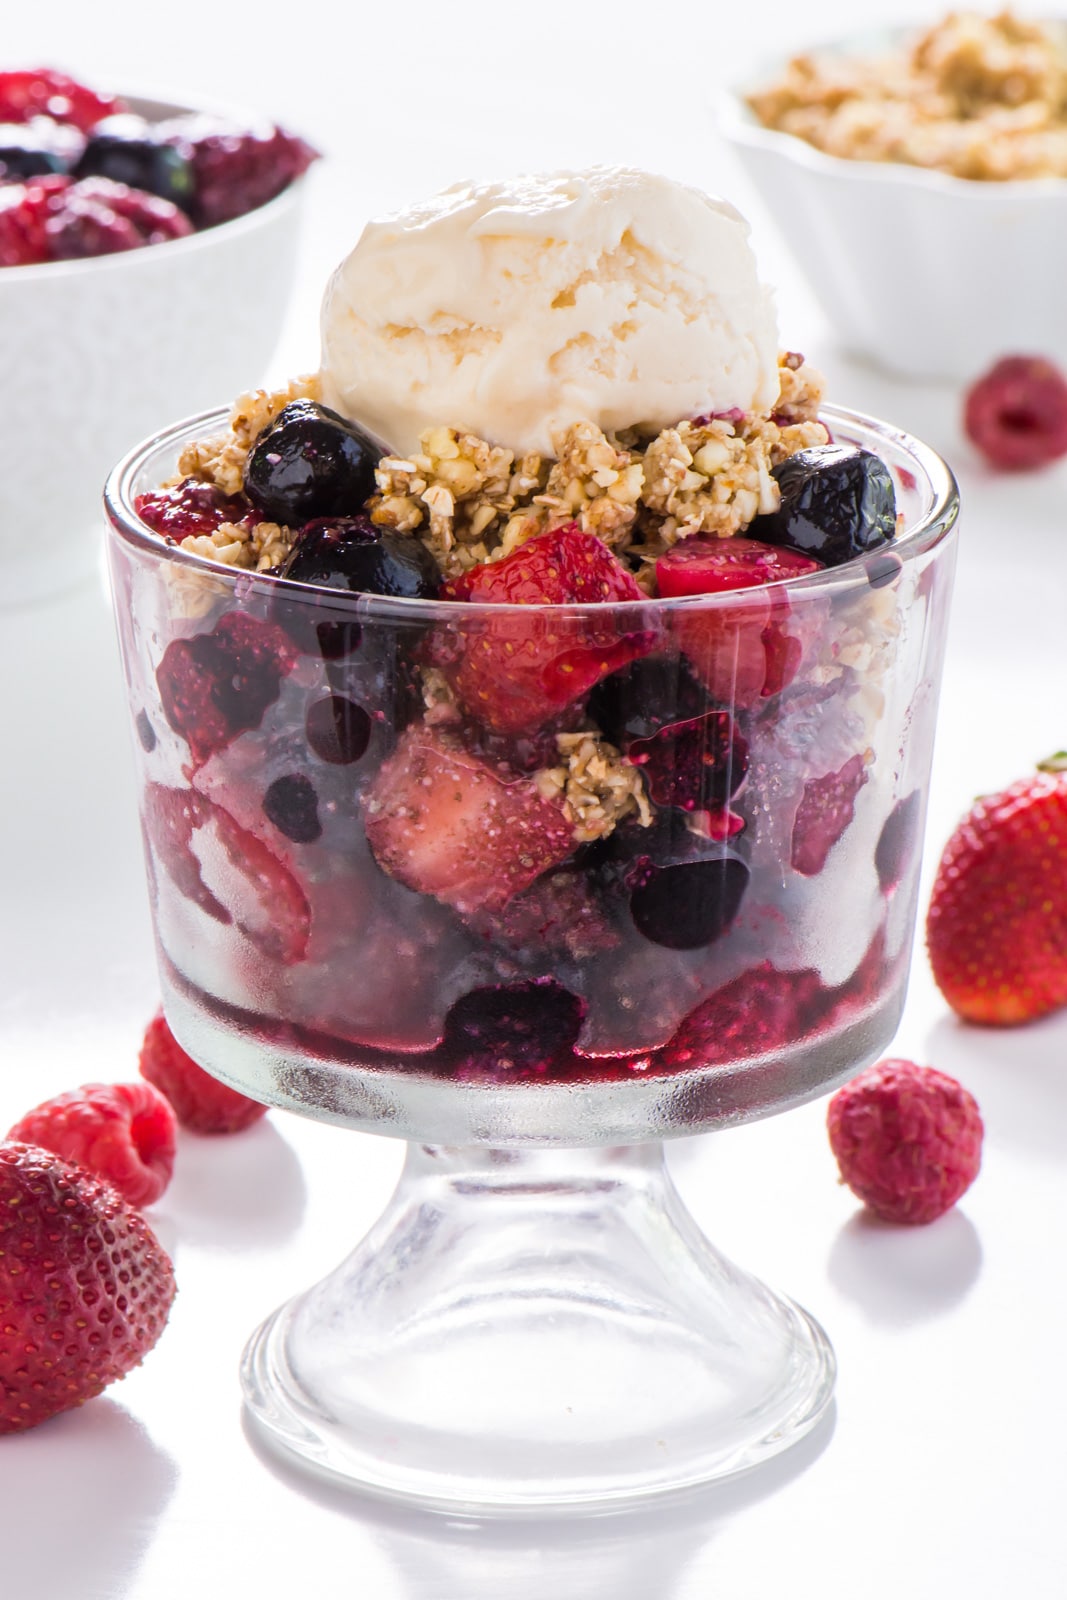 Celebrate National Cherry Dessert Day with this Vegan No-Bake Cherry Fruit Crisp. It's a healthy, delicious way to celebrate warmer weather!